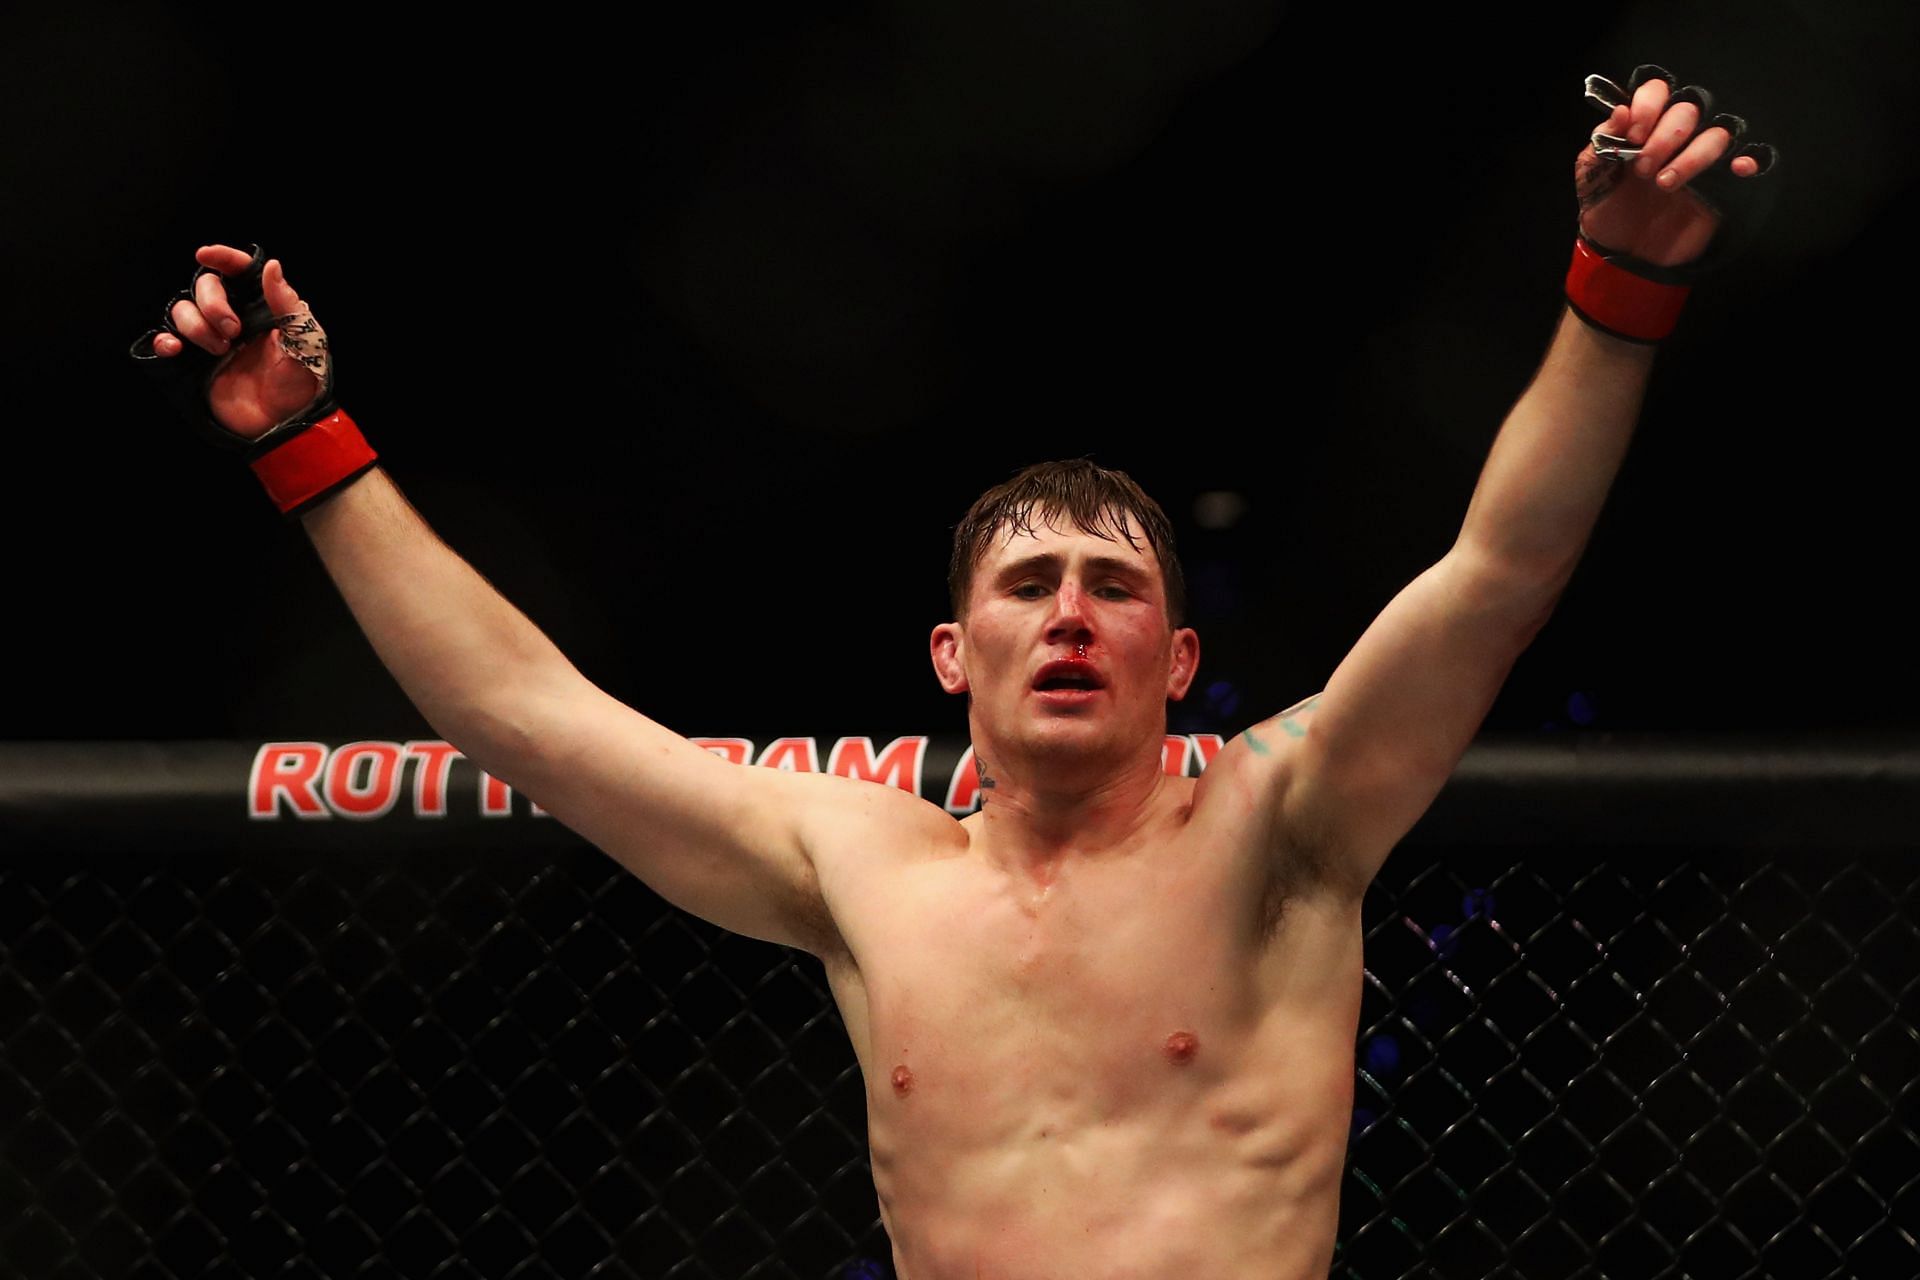 Darren Till has only won one fight at middleweight, but remains ranked there